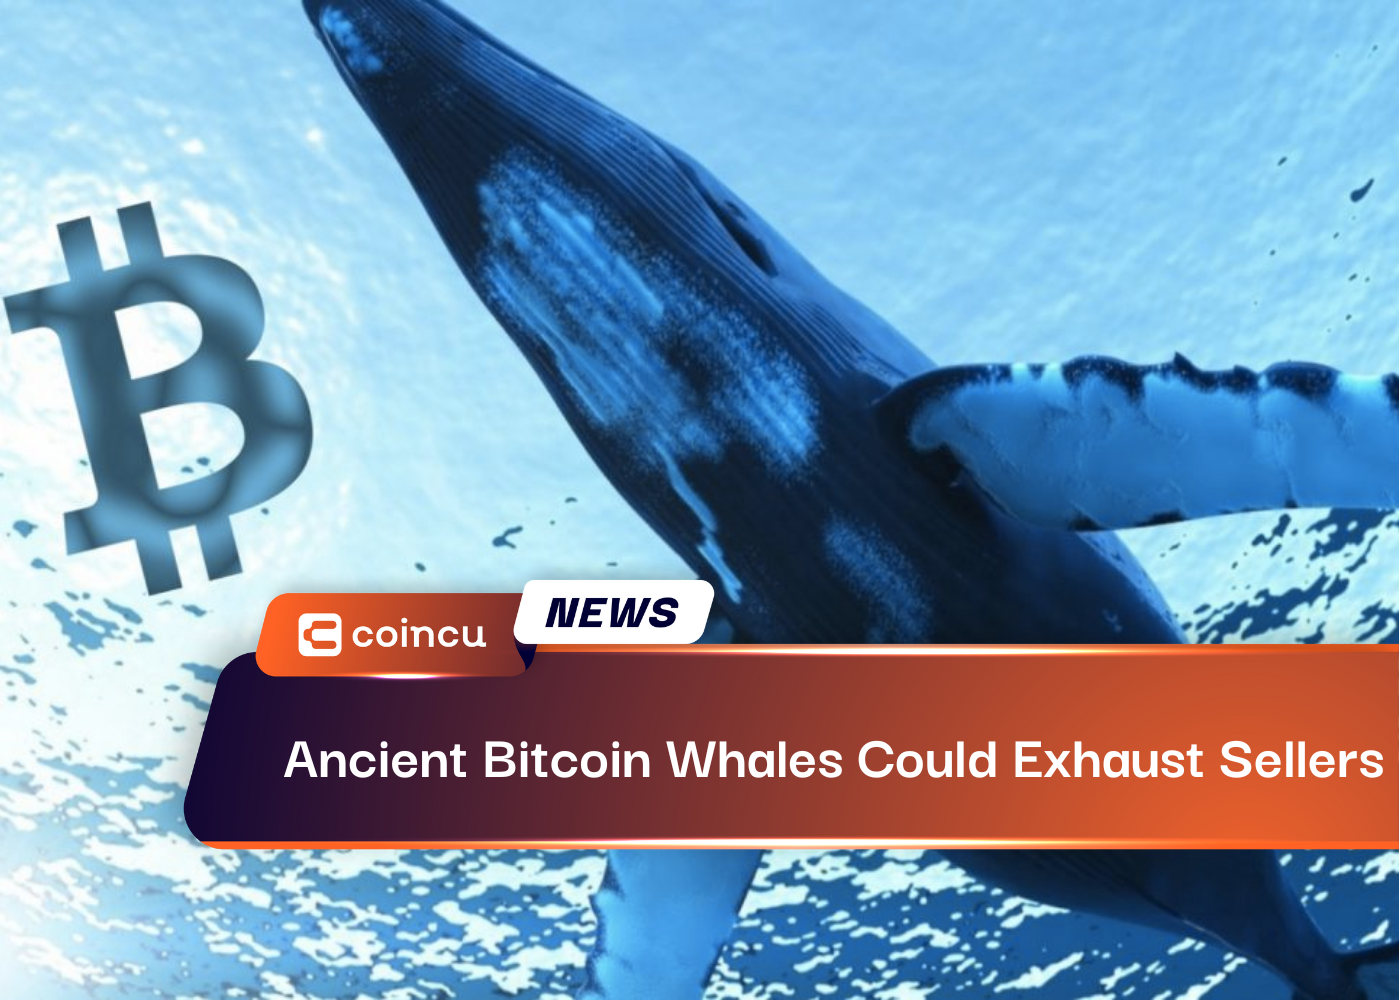 Ancient Bitcoin Whales Could Exhaust Sellers